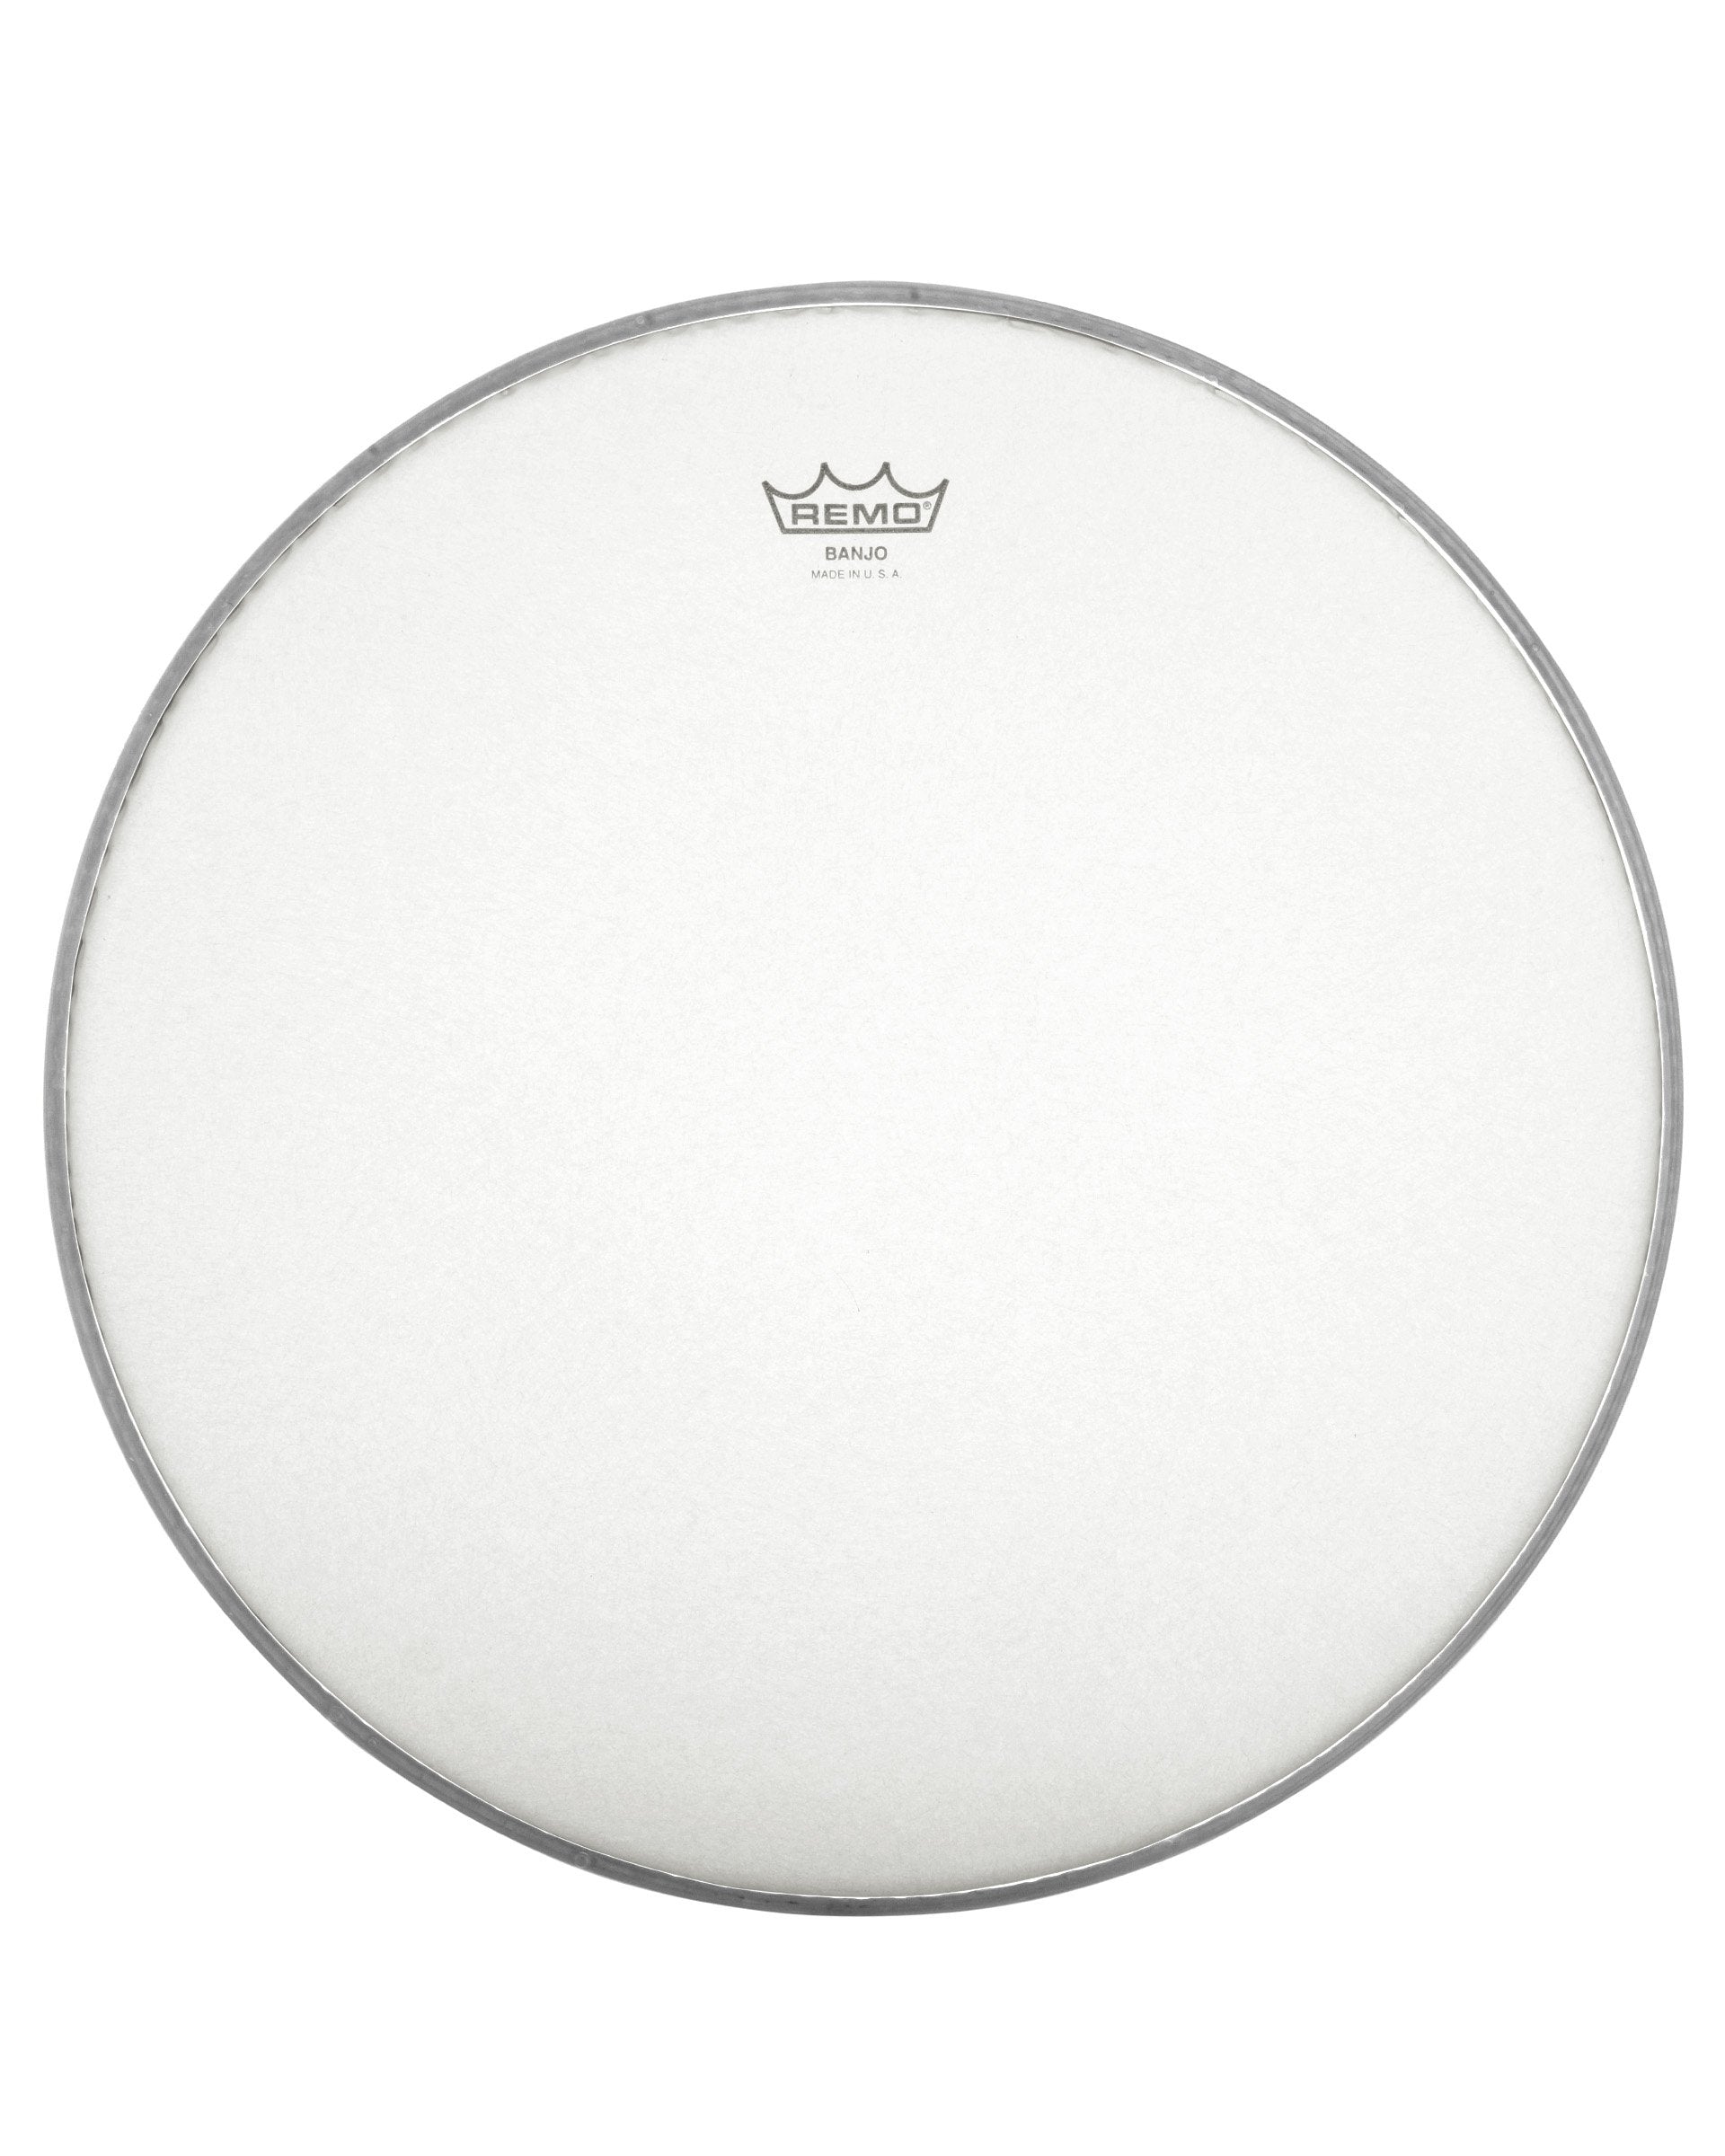 Image 1 of Remo Frosted Top Banjo Head, 10 1/4 Inch Diameter, High Crown - SKU# B1004-H-FRT : Product Type Accessories & Parts : Elderly Instruments